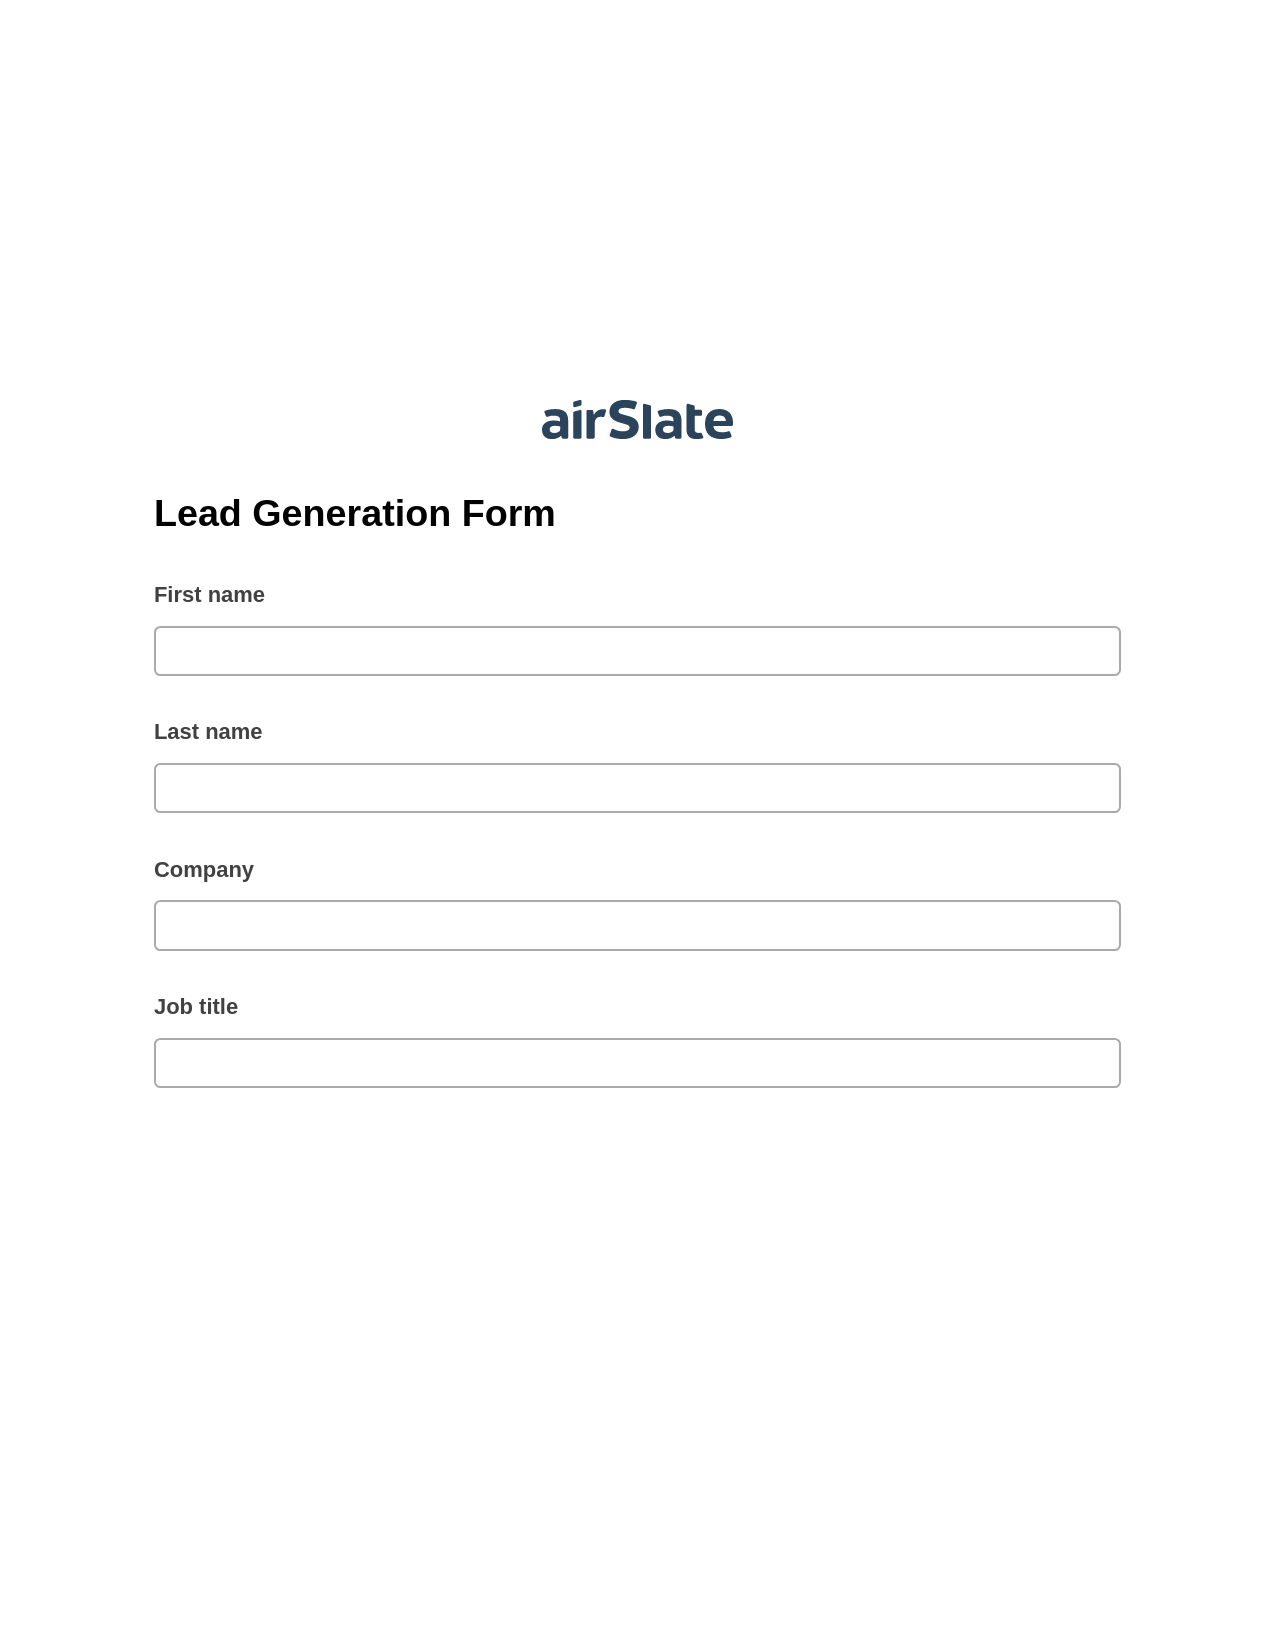 Lead Generation Form Pre-fill from Google Sheets Bot, Roles Reminder Bot, Post-finish Document Bot